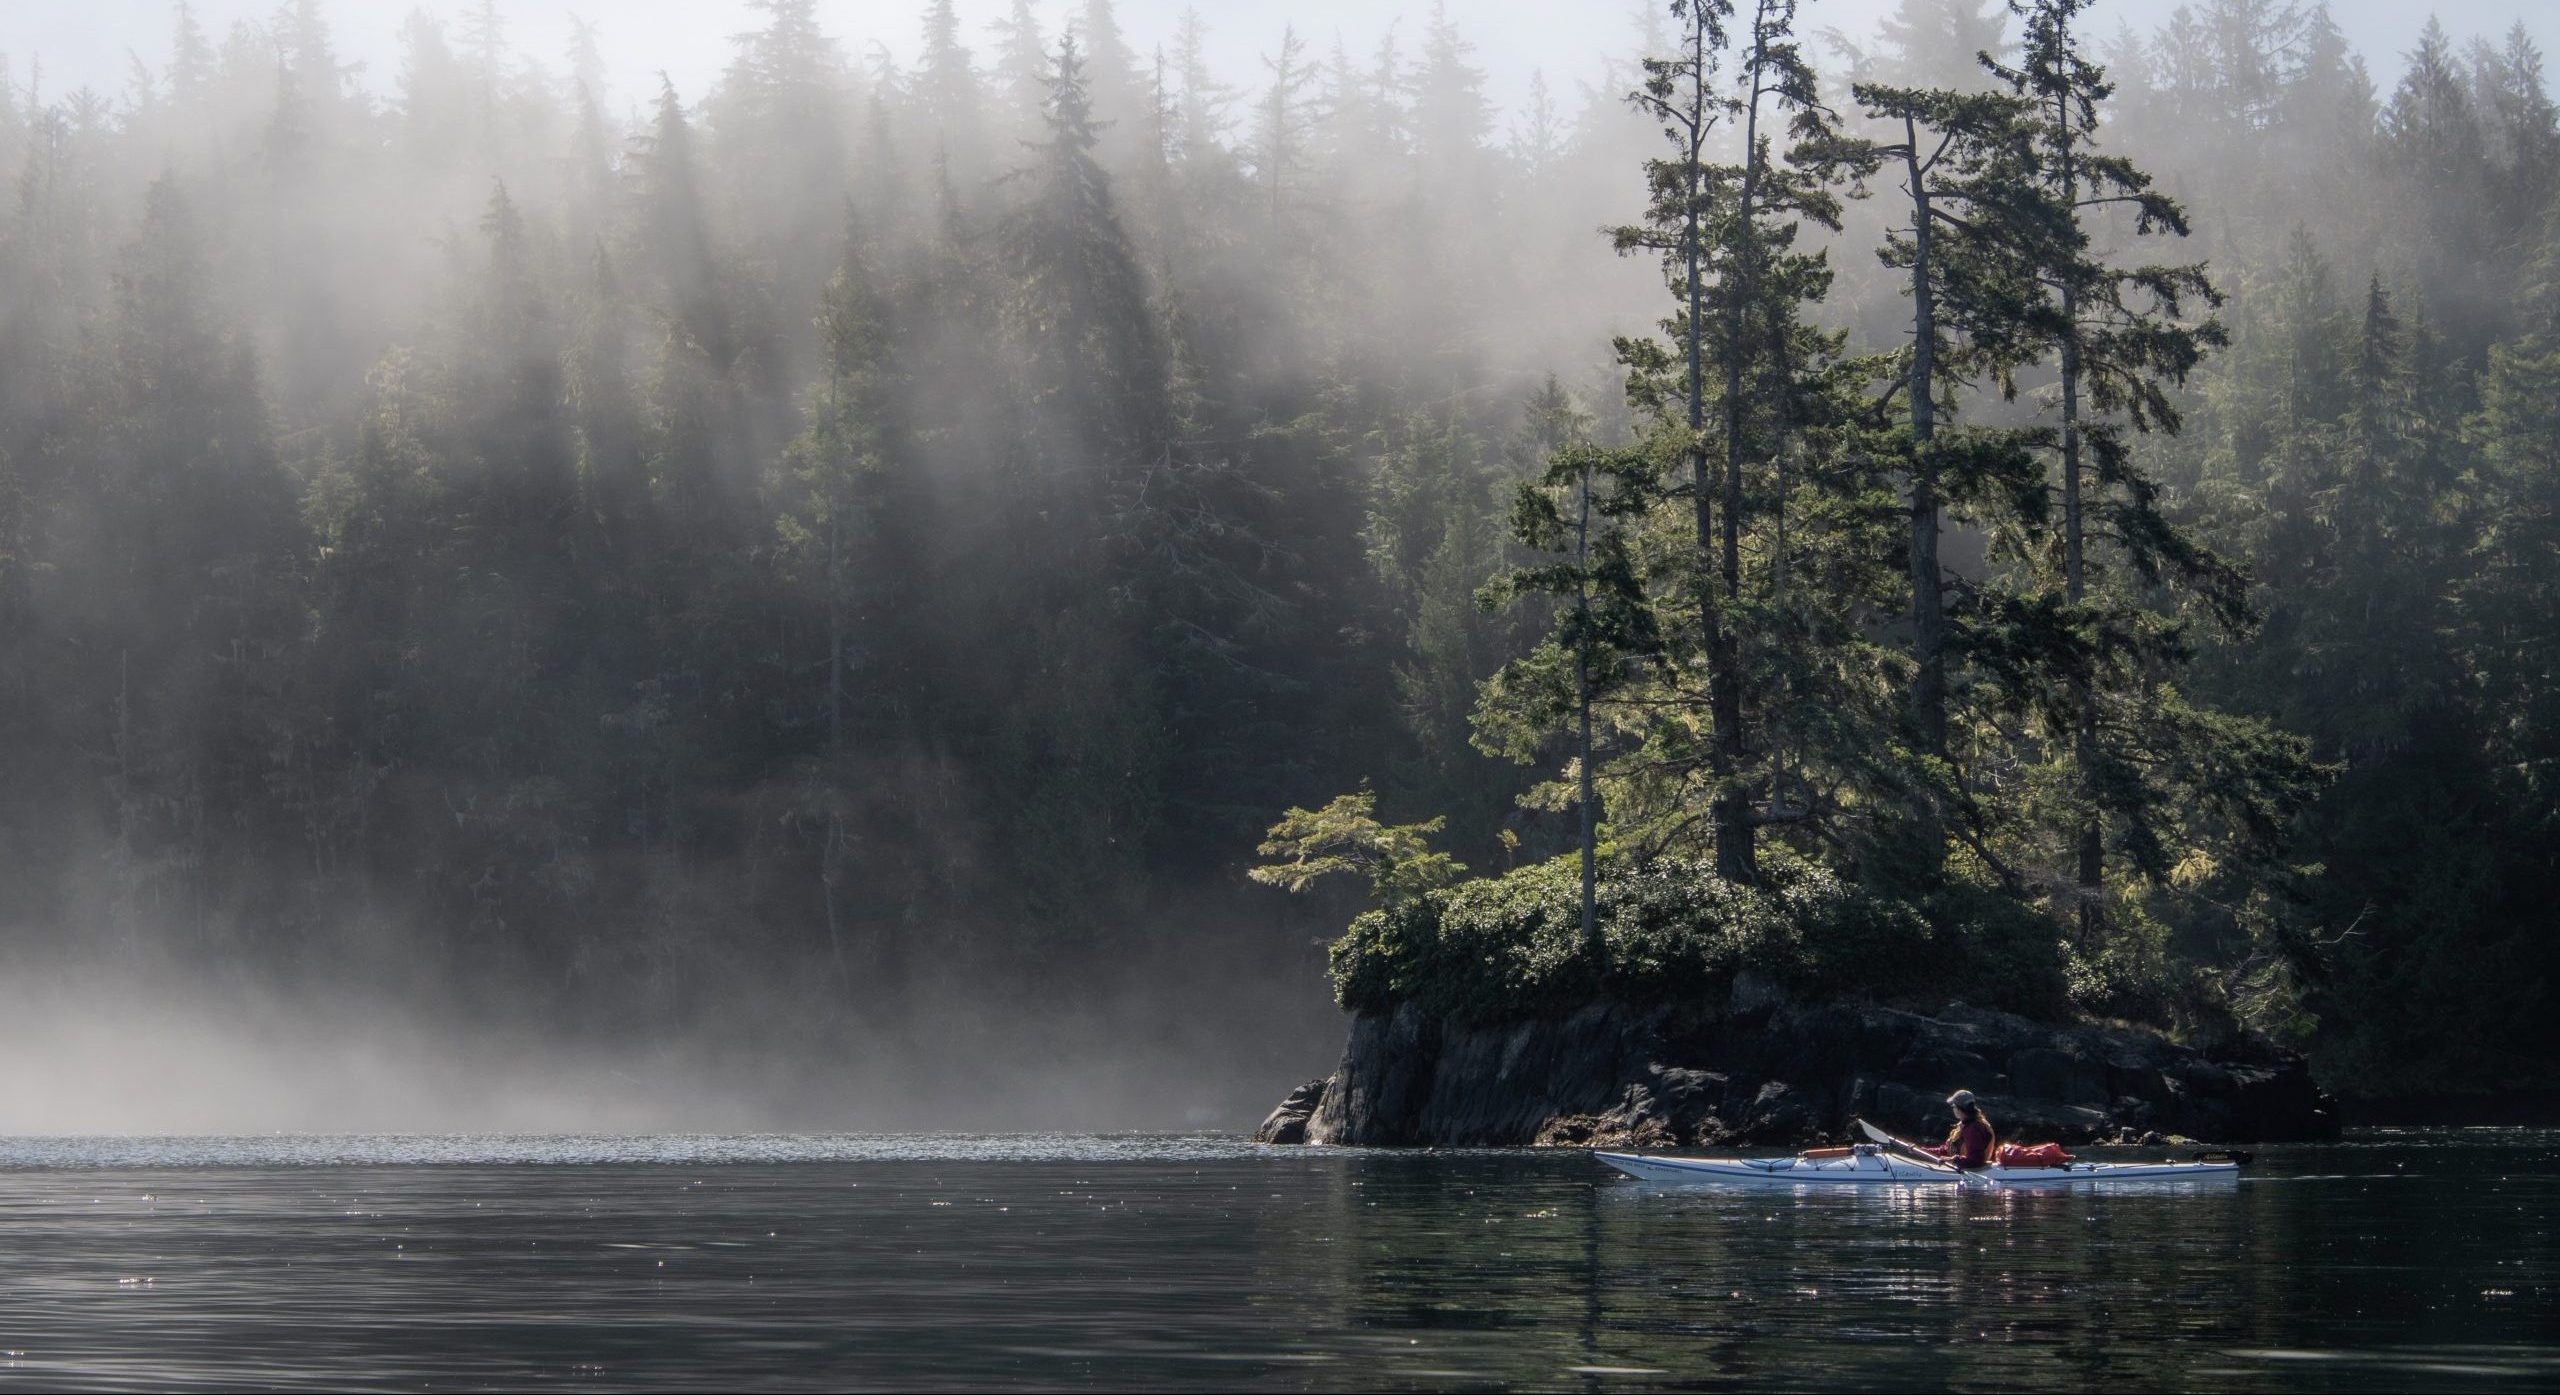 Kayaker Paddling through Misty Landscape with Forested Backdrop in Coastal BC